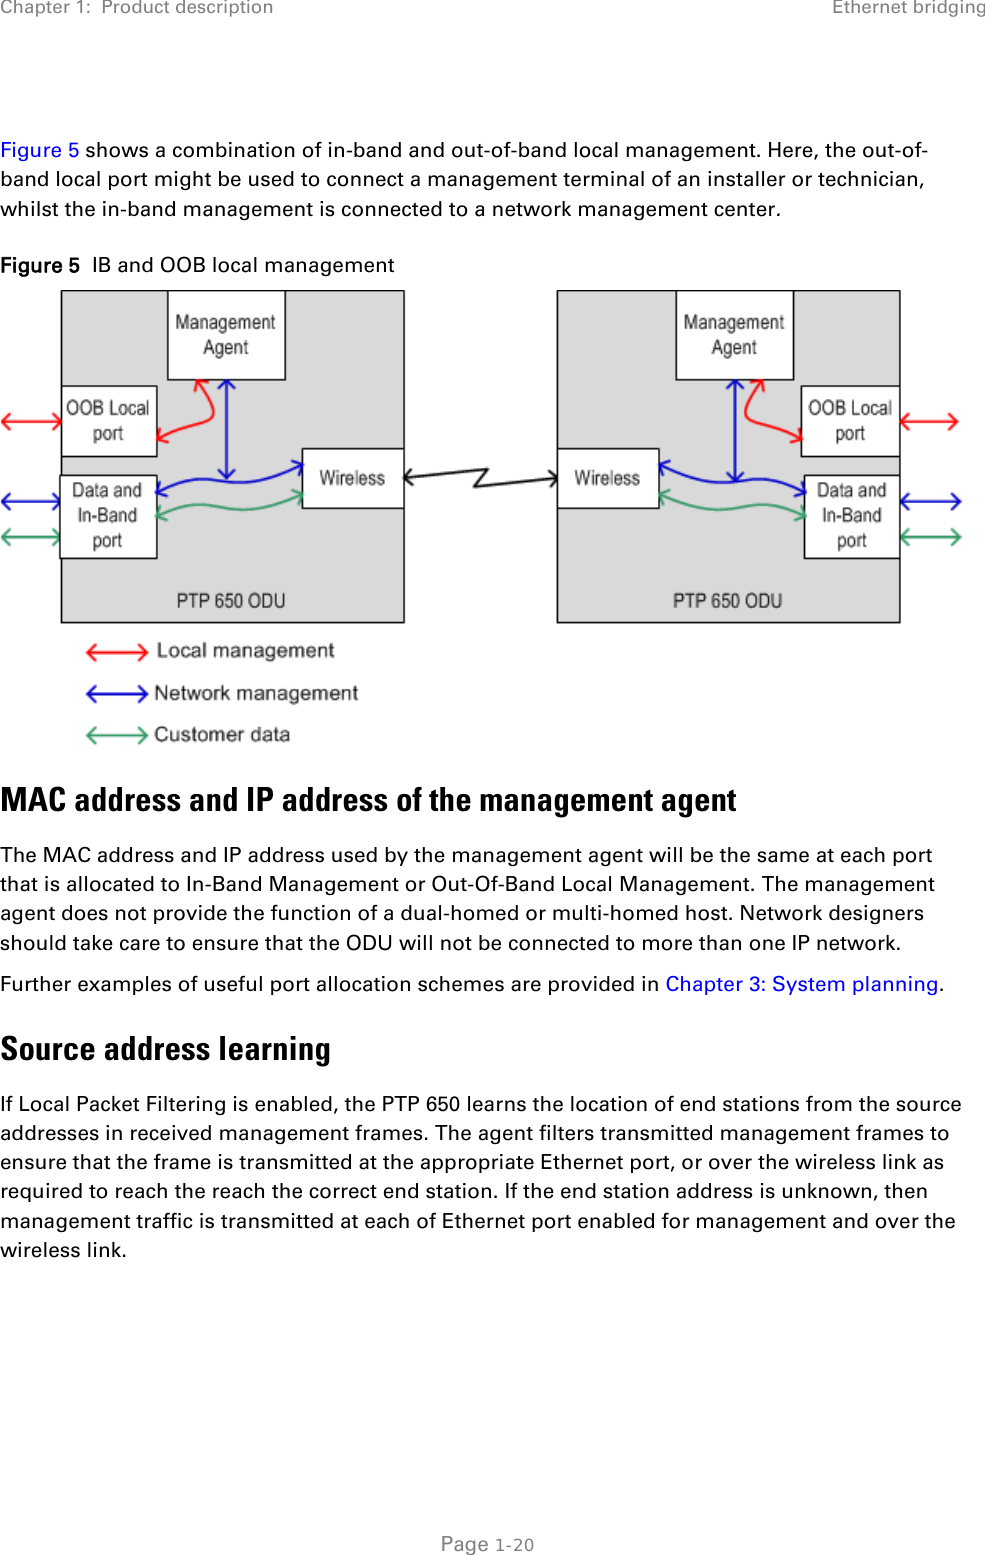 Chapter 1:  Product description Ethernet bridging   Figure 5 shows a combination of in-band and out-of-band local management. Here, the out-of-band local port might be used to connect a management terminal of an installer or technician, whilst the in-band management is connected to a network management center. Figure 5  IB and OOB local management  MAC address and IP address of the management agent The MAC address and IP address used by the management agent will be the same at each port that is allocated to In-Band Management or Out-Of-Band Local Management. The management agent does not provide the function of a dual-homed or multi-homed host. Network designers should take care to ensure that the ODU will not be connected to more than one IP network. Further examples of useful port allocation schemes are provided in Chapter 3: System planning. Source address learning If Local Packet Filtering is enabled, the PTP 650 learns the location of end stations from the source addresses in received management frames. The agent filters transmitted management frames to ensure that the frame is transmitted at the appropriate Ethernet port, or over the wireless link as required to reach the reach the correct end station. If the end station address is unknown, then management traffic is transmitted at each of Ethernet port enabled for management and over the wireless link.  Page 1-20 